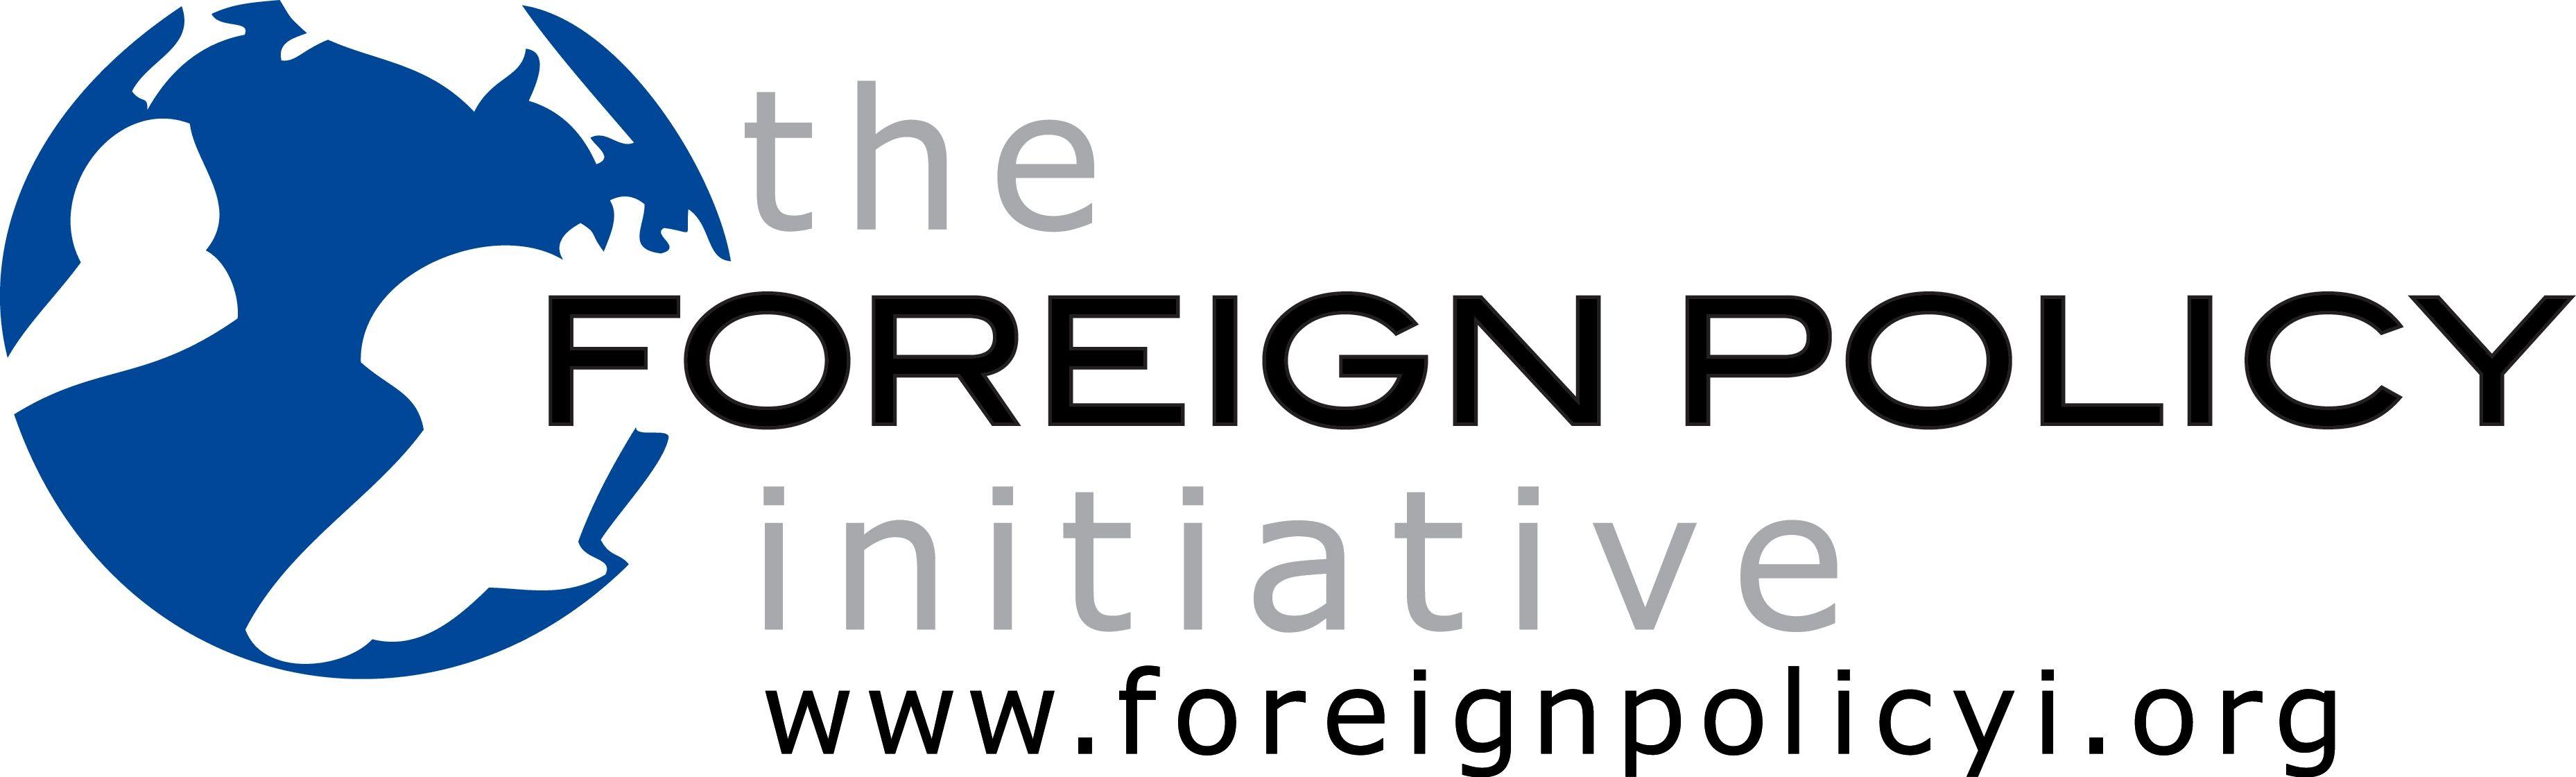 Foreign Media Logo - The Foreign Policy Initiative